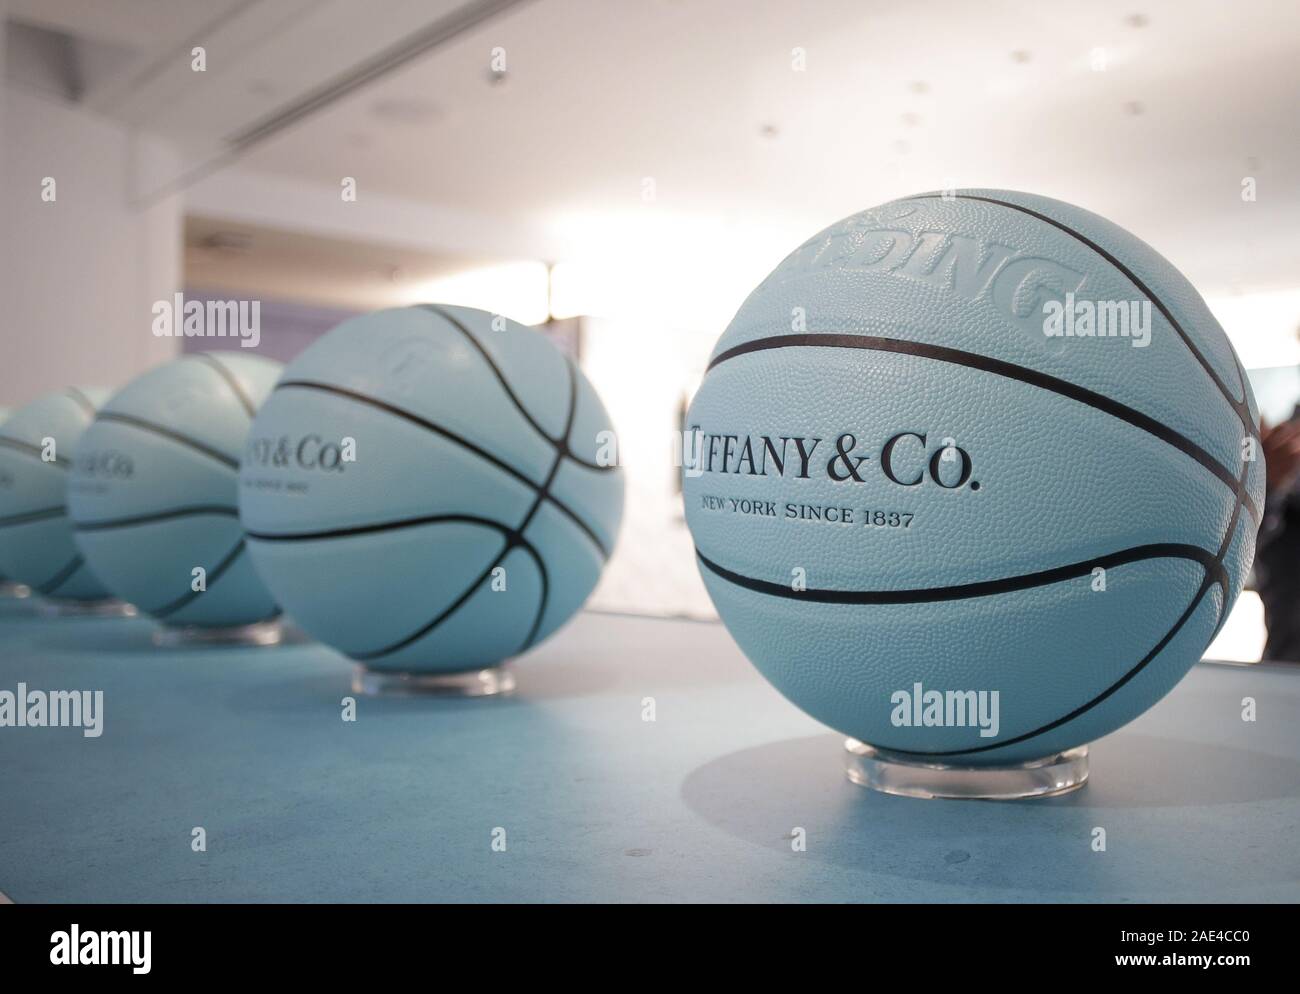 What are the Tiffany & Co-made NBA Championship Trophy and Louis